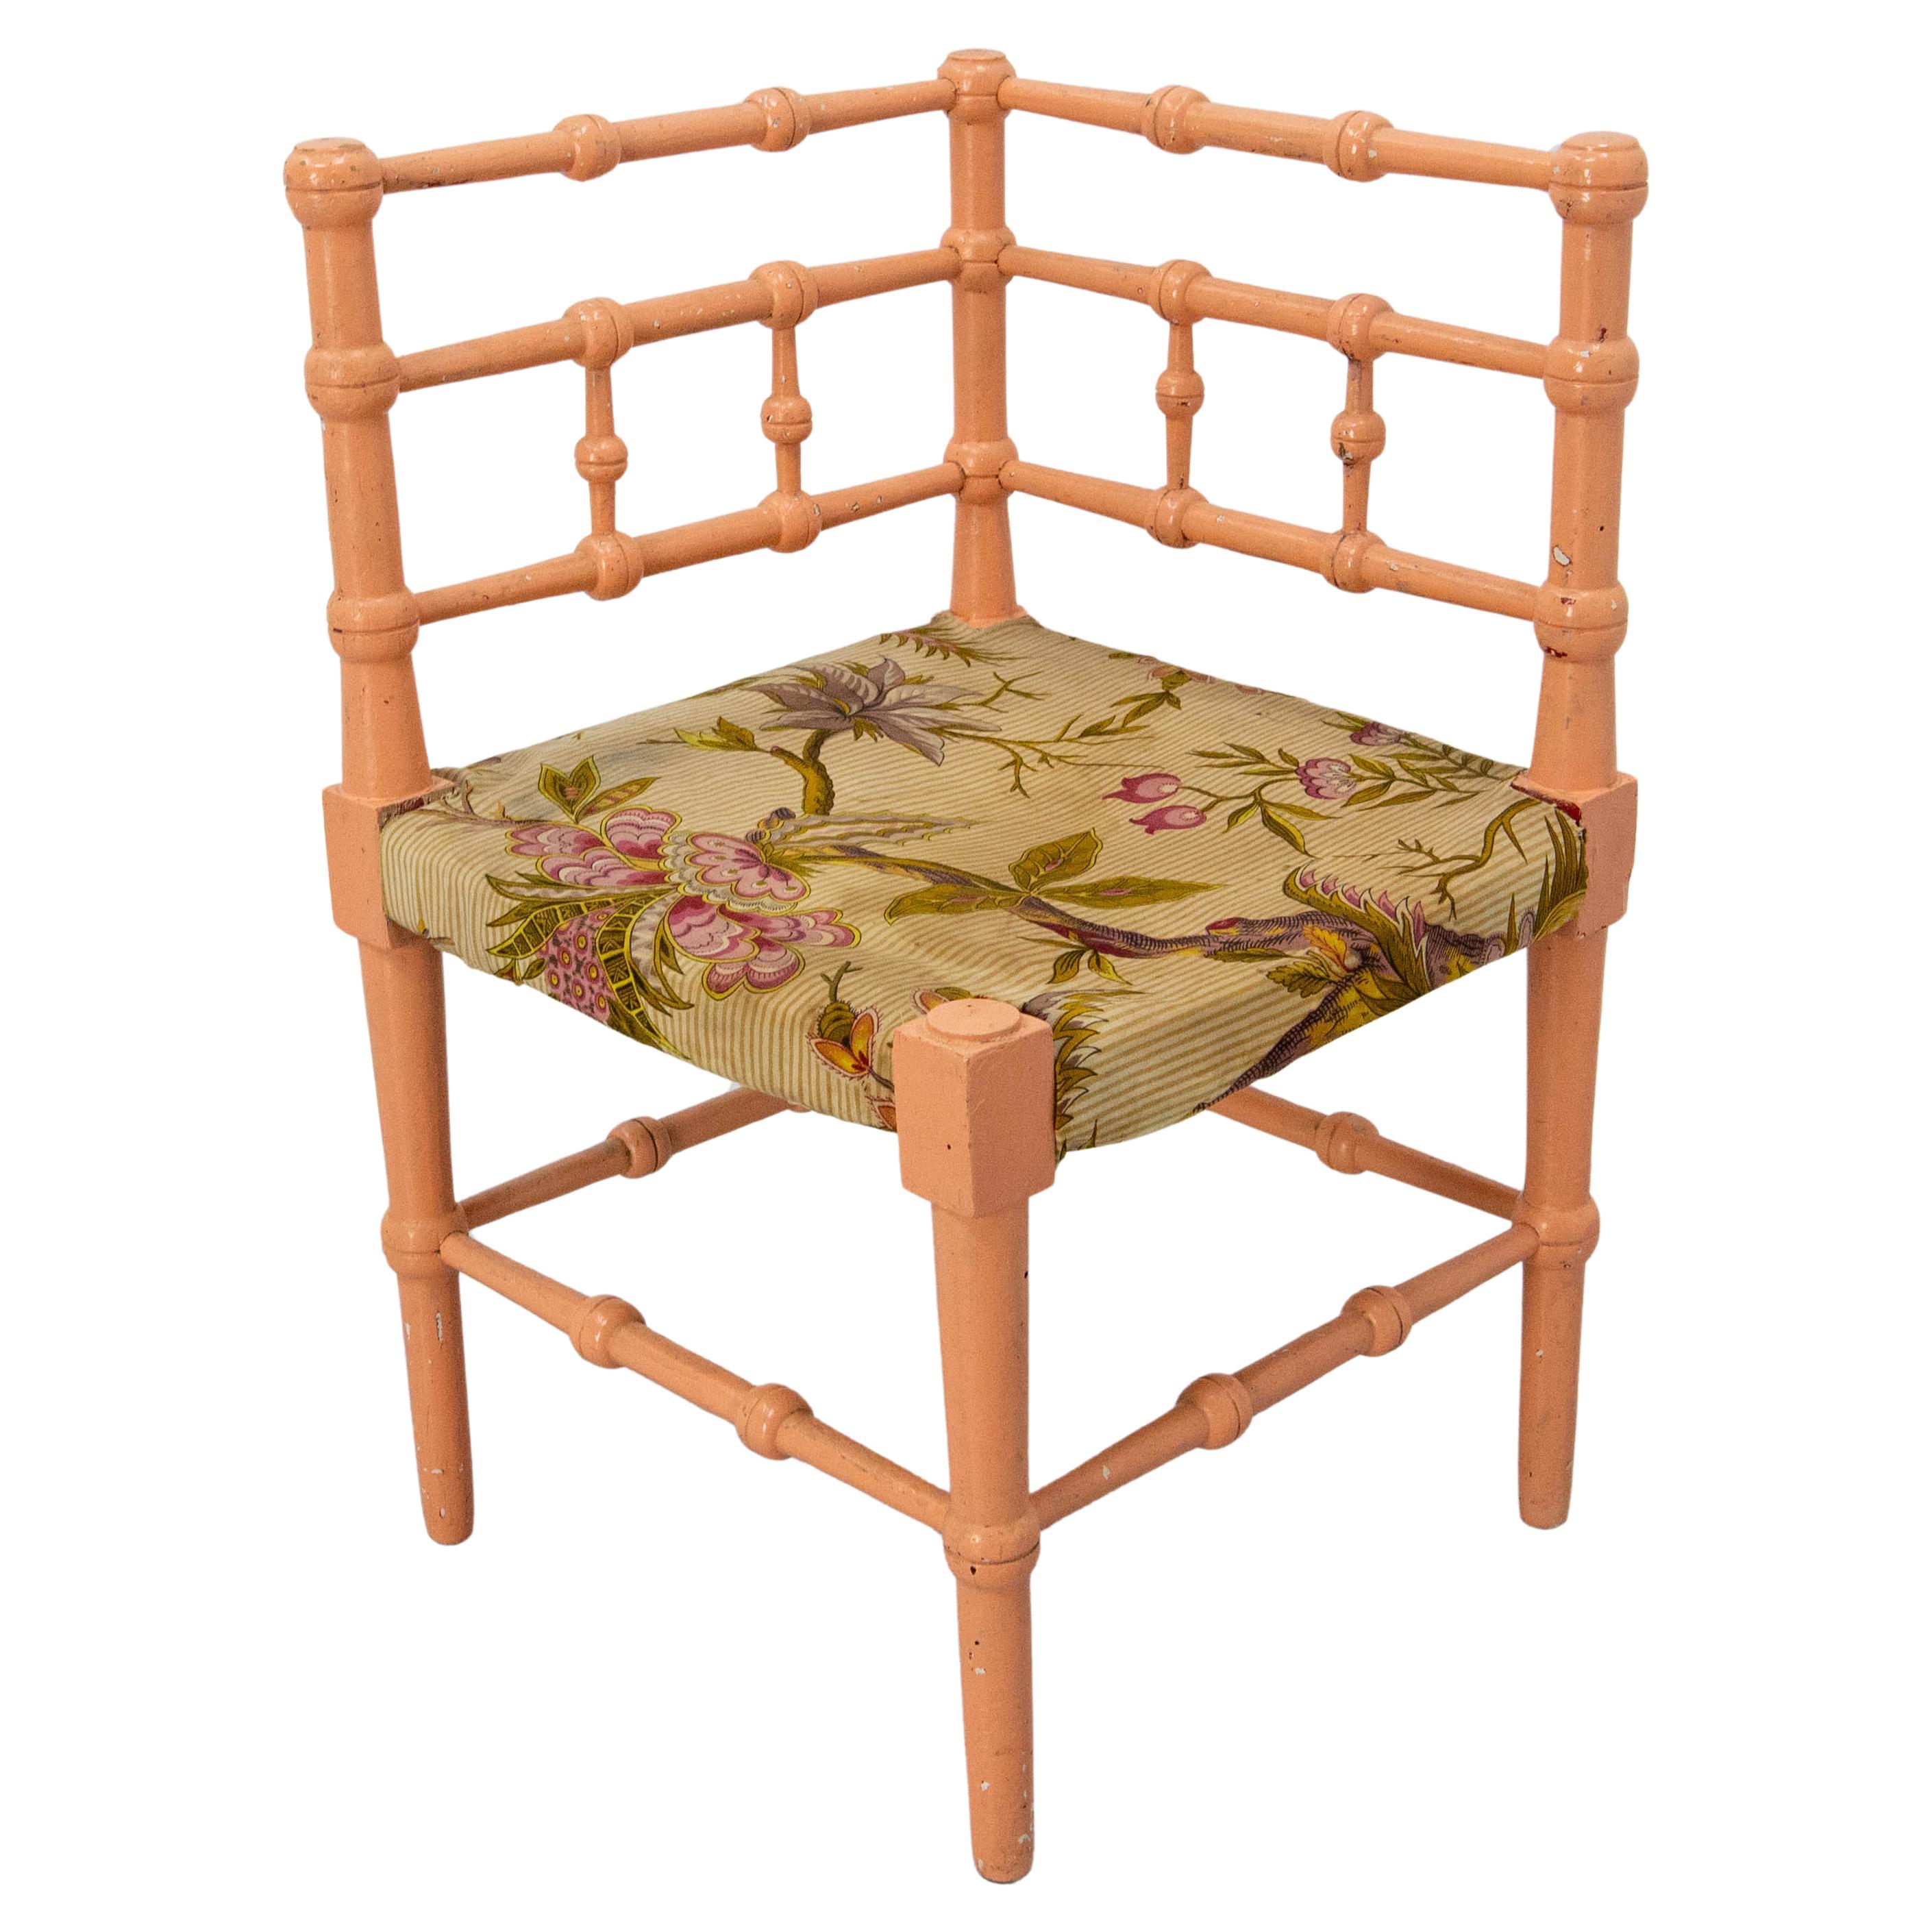 Turned Corner Chair for Child Painted Wood & Fabric French, 19th Century